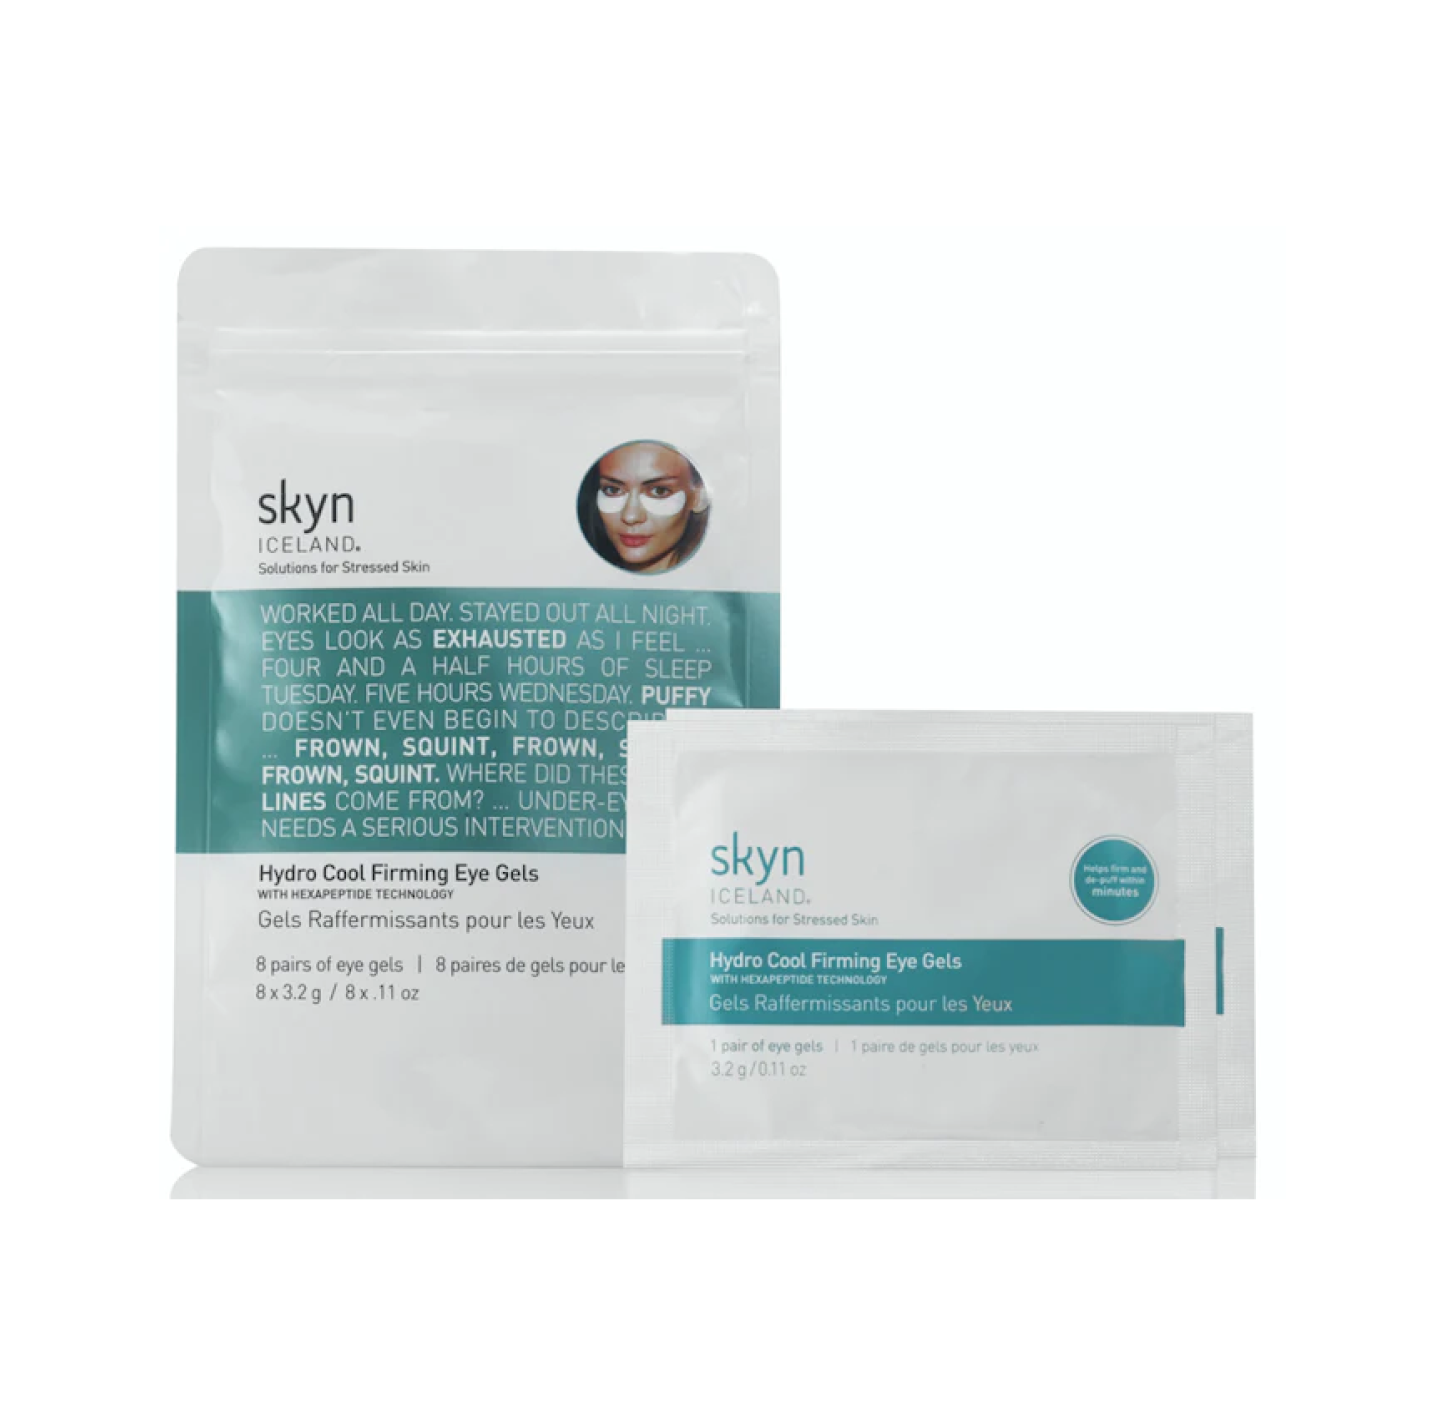 Hydro Cool Gels Raffermissants pour les Yeux (8 paires) by Skyn Iceland